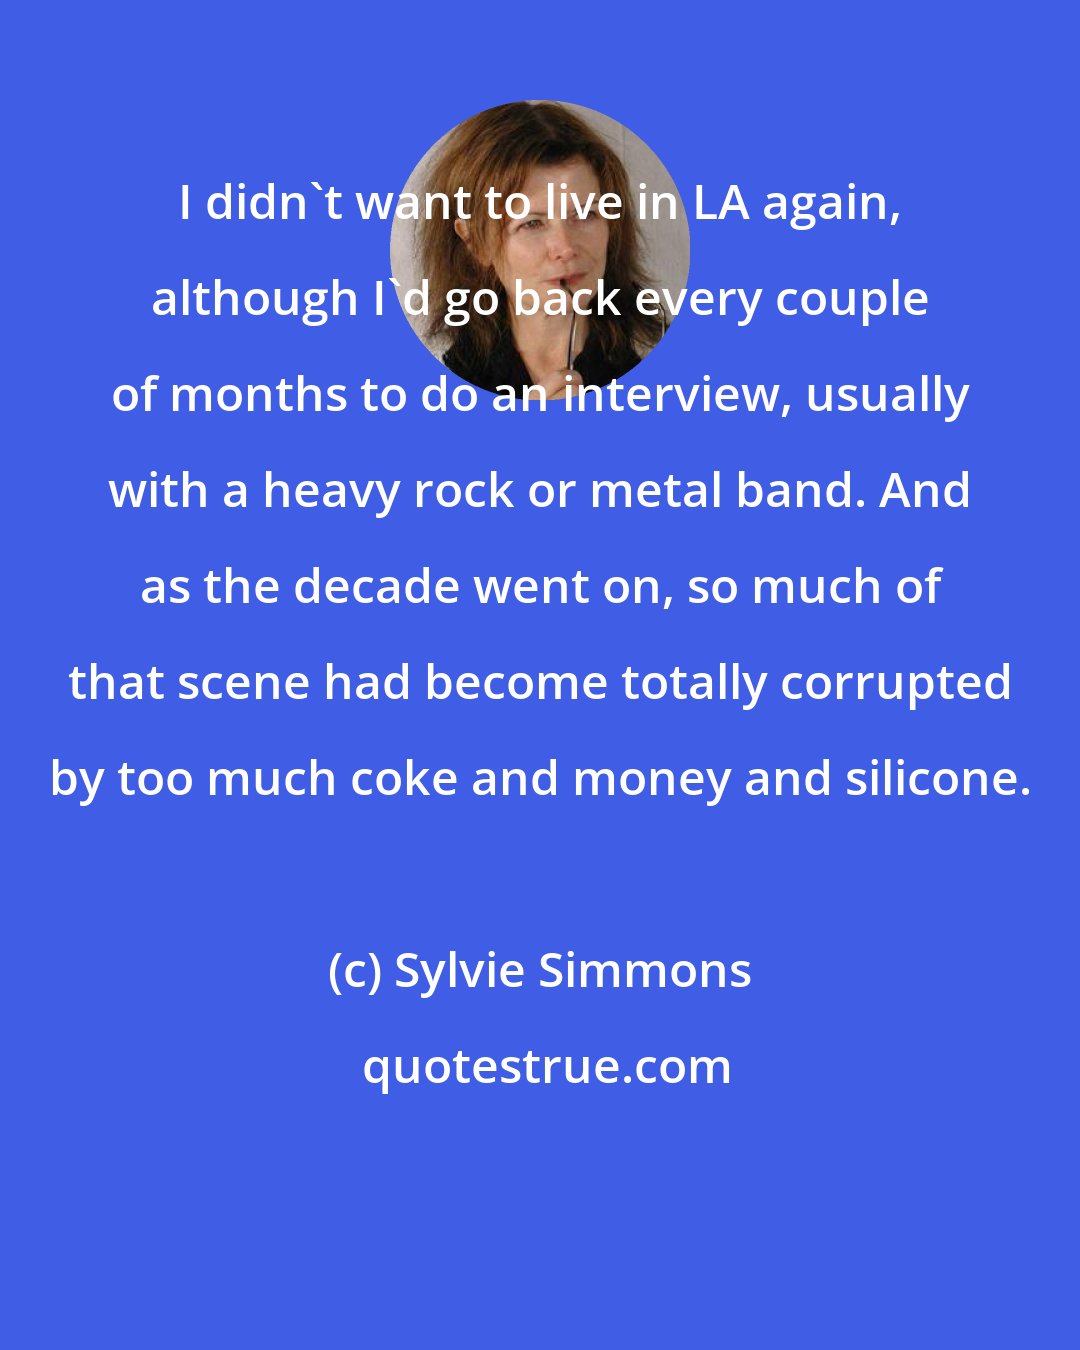 Sylvie Simmons: I didn't want to live in LA again, although I'd go back every couple of months to do an interview, usually with a heavy rock or metal band. And as the decade went on, so much of that scene had become totally corrupted by too much coke and money and silicone.